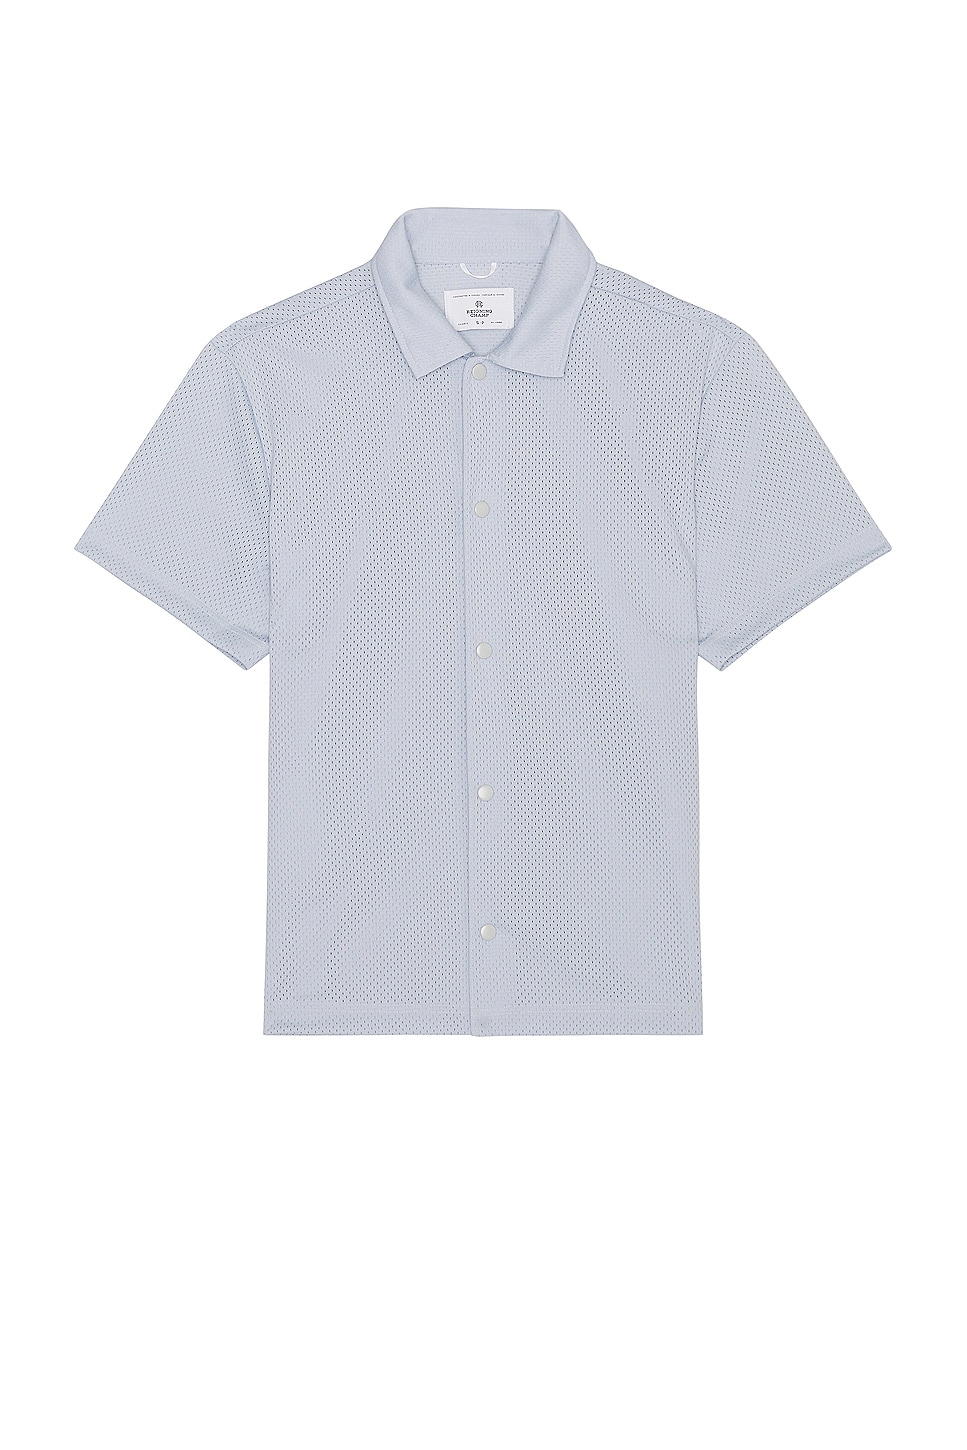 Image 1 of Reigning Champ Shootaround Shirt in Ice Blue